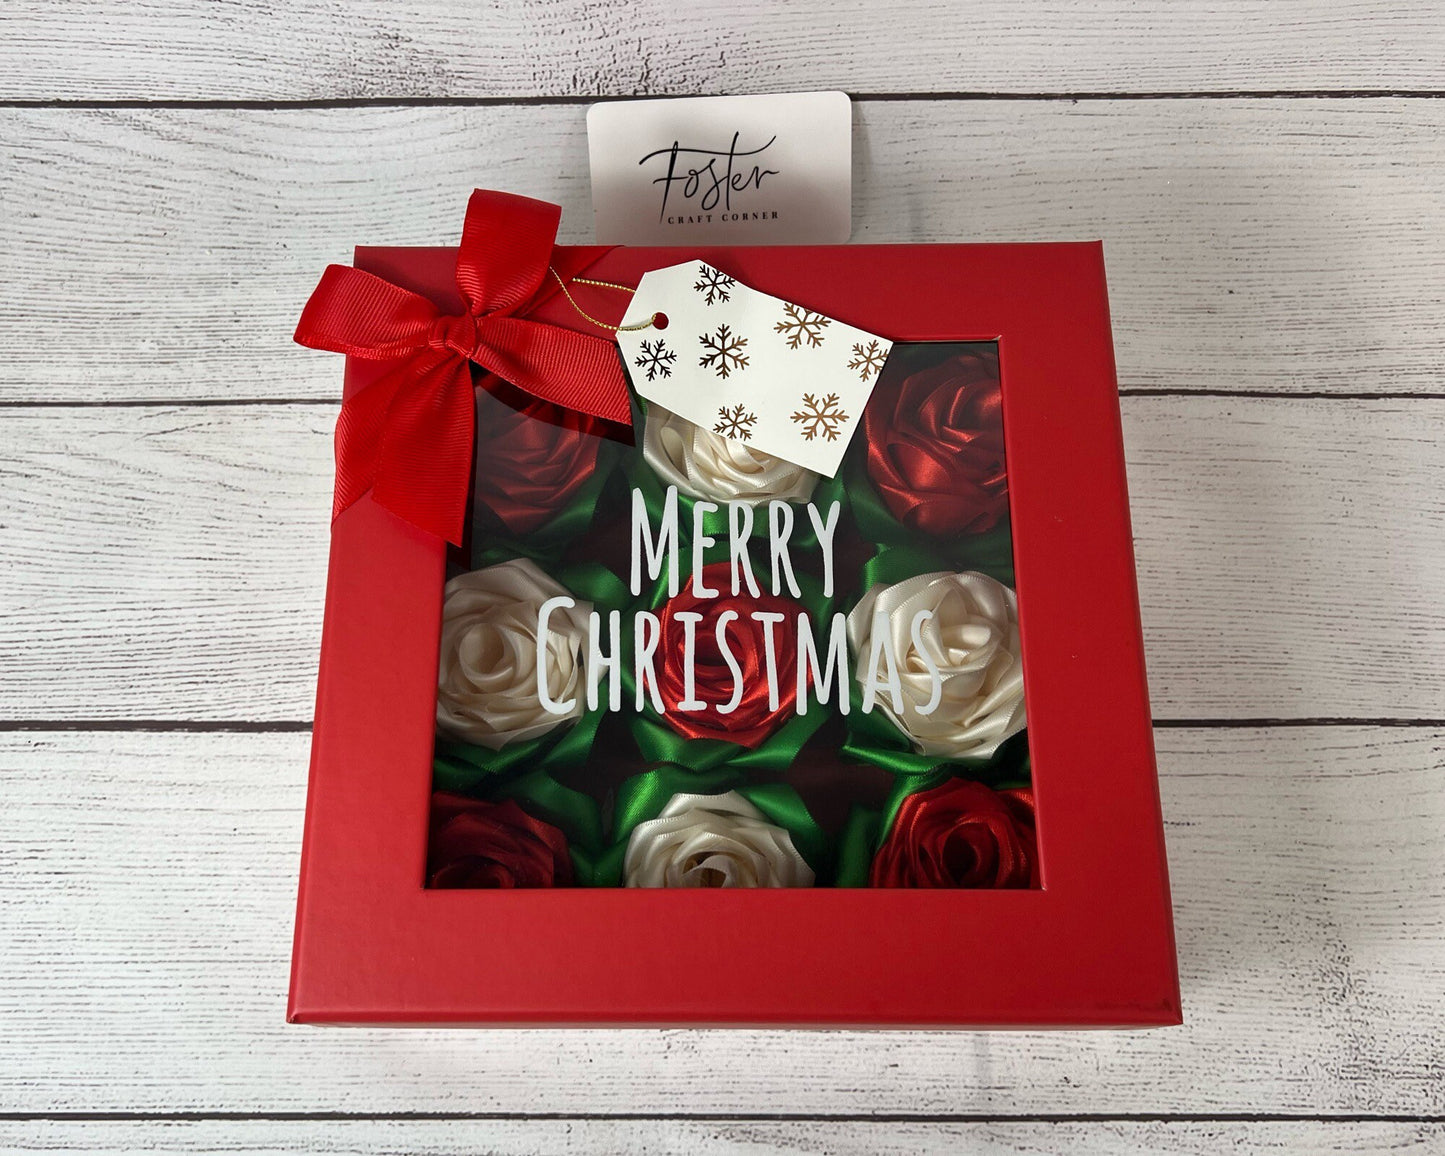 Christmas Rose Box - Gift - Christmas Decorations - Merry Christmas - Present - Unique - Handmade Ribbon Roses - White and Red Roses - Party